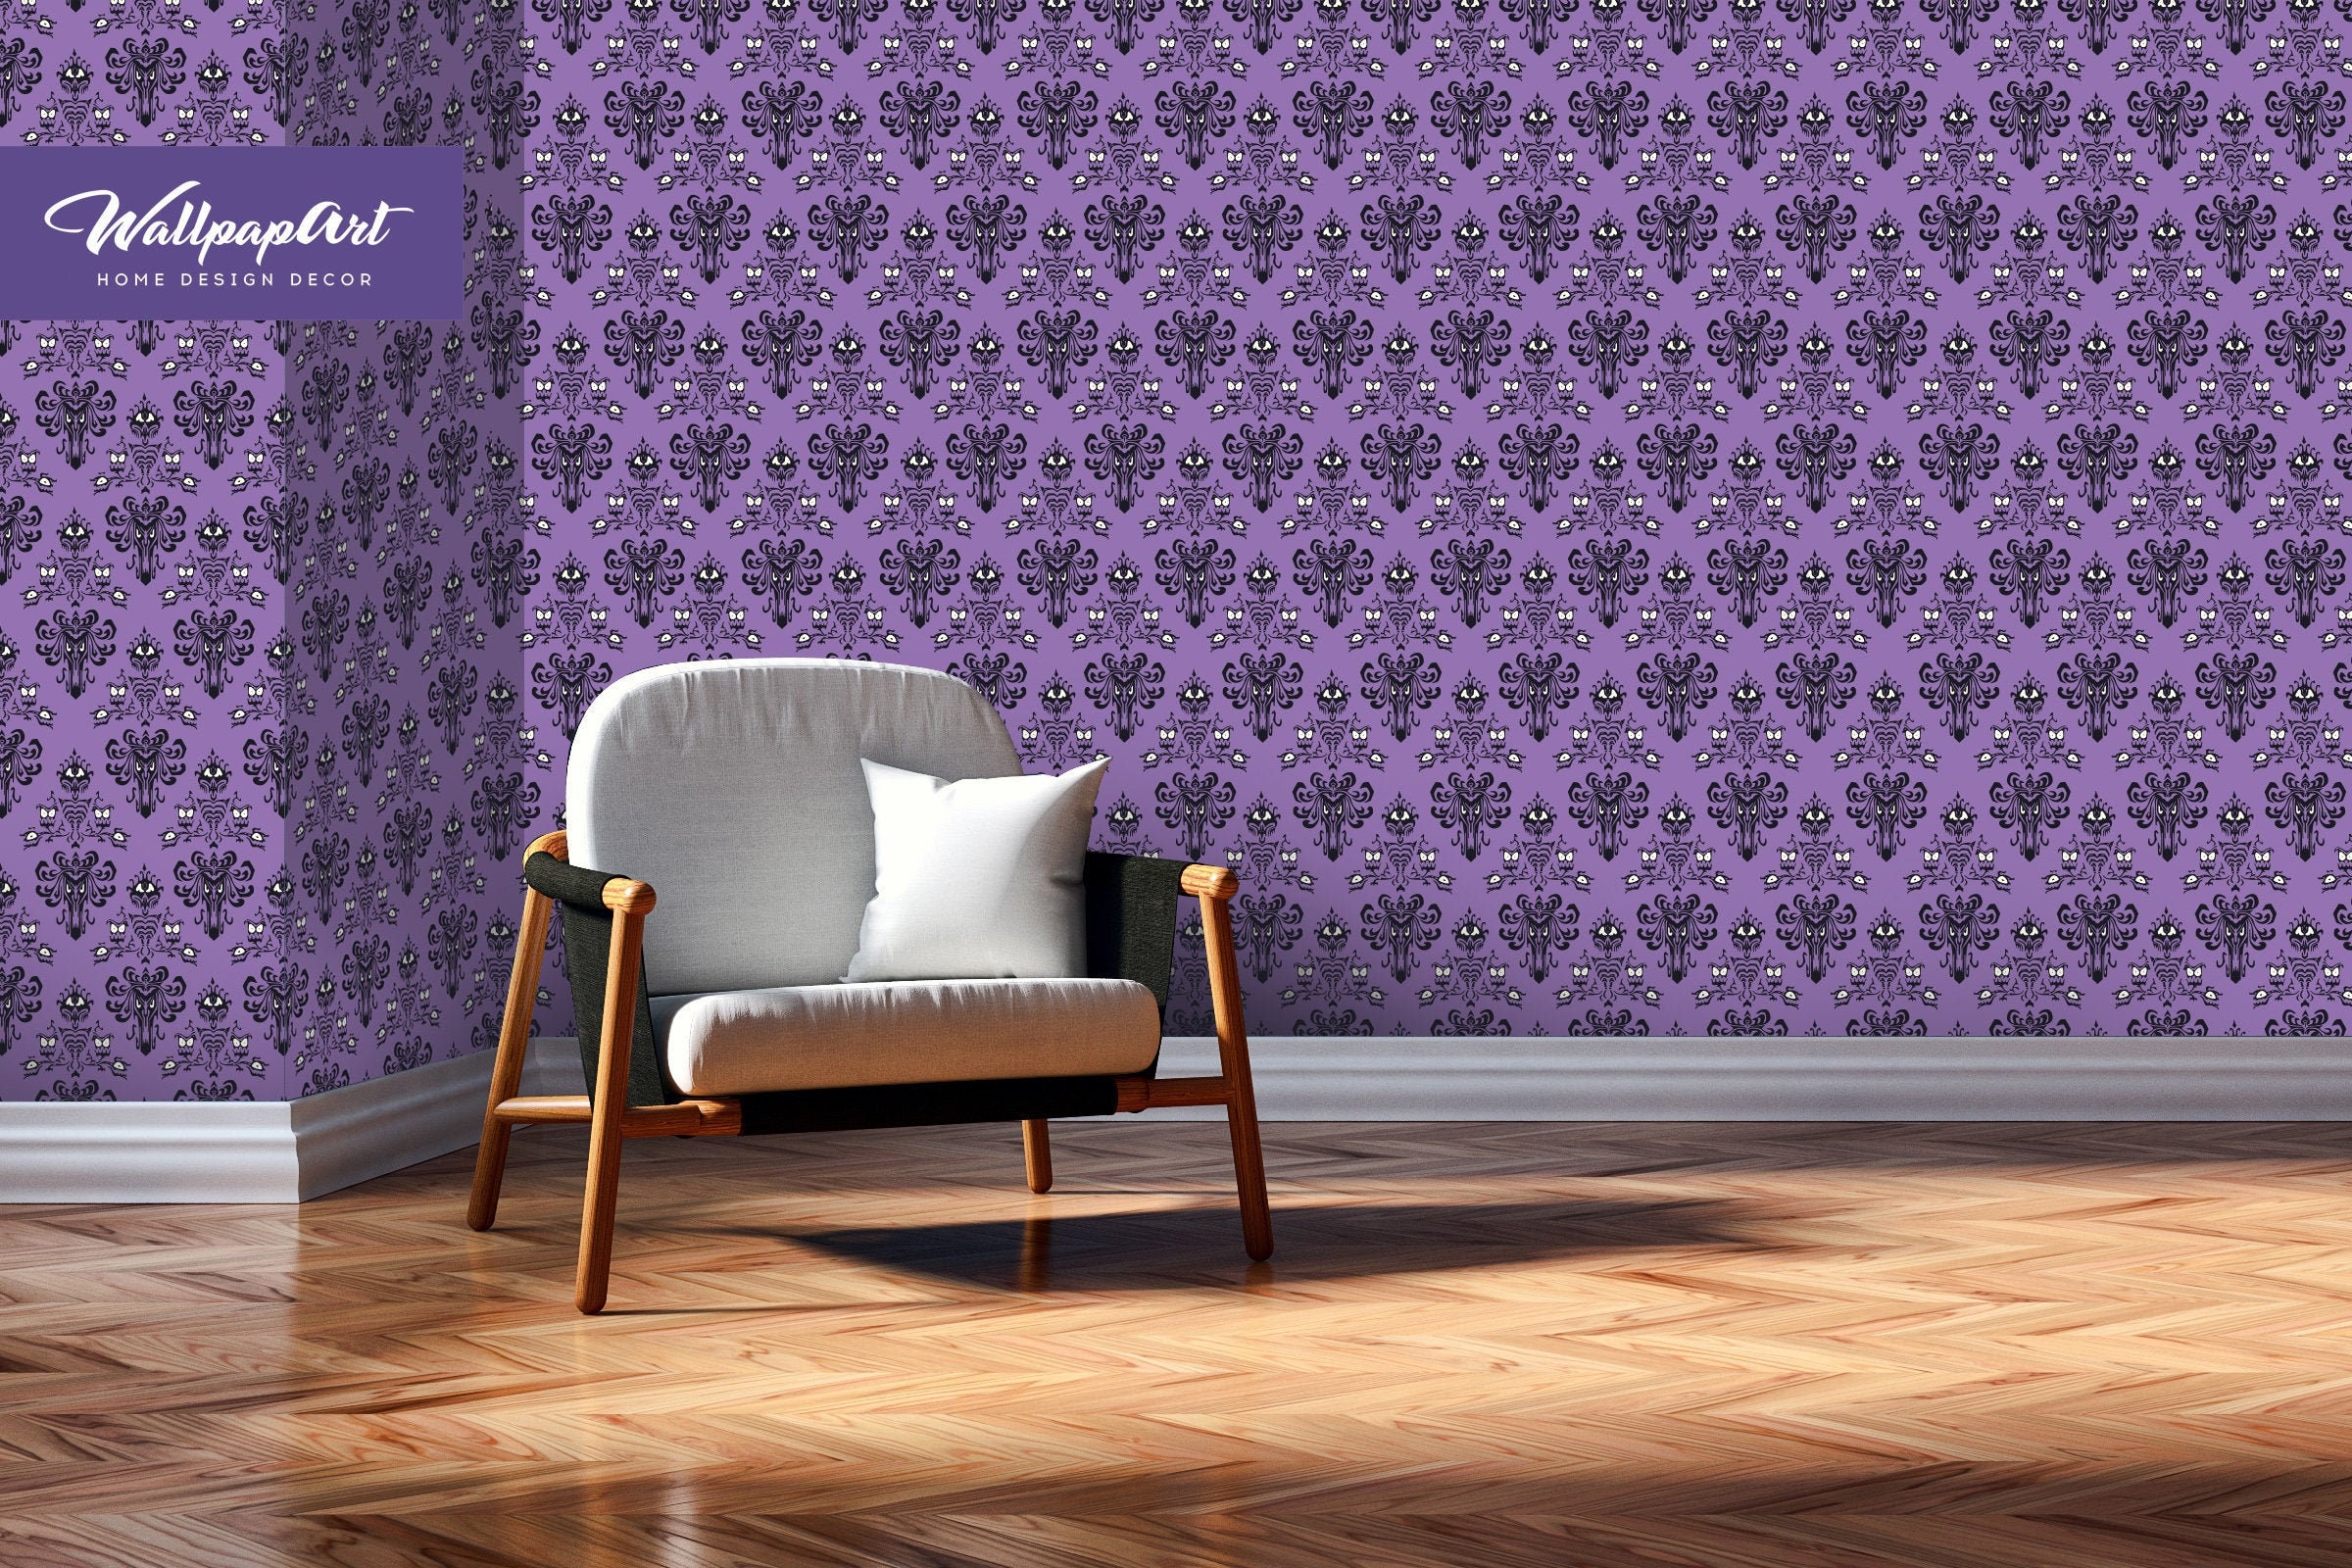 Removable Wallpaper Victorian Style, Peel and Stick Wall Decor